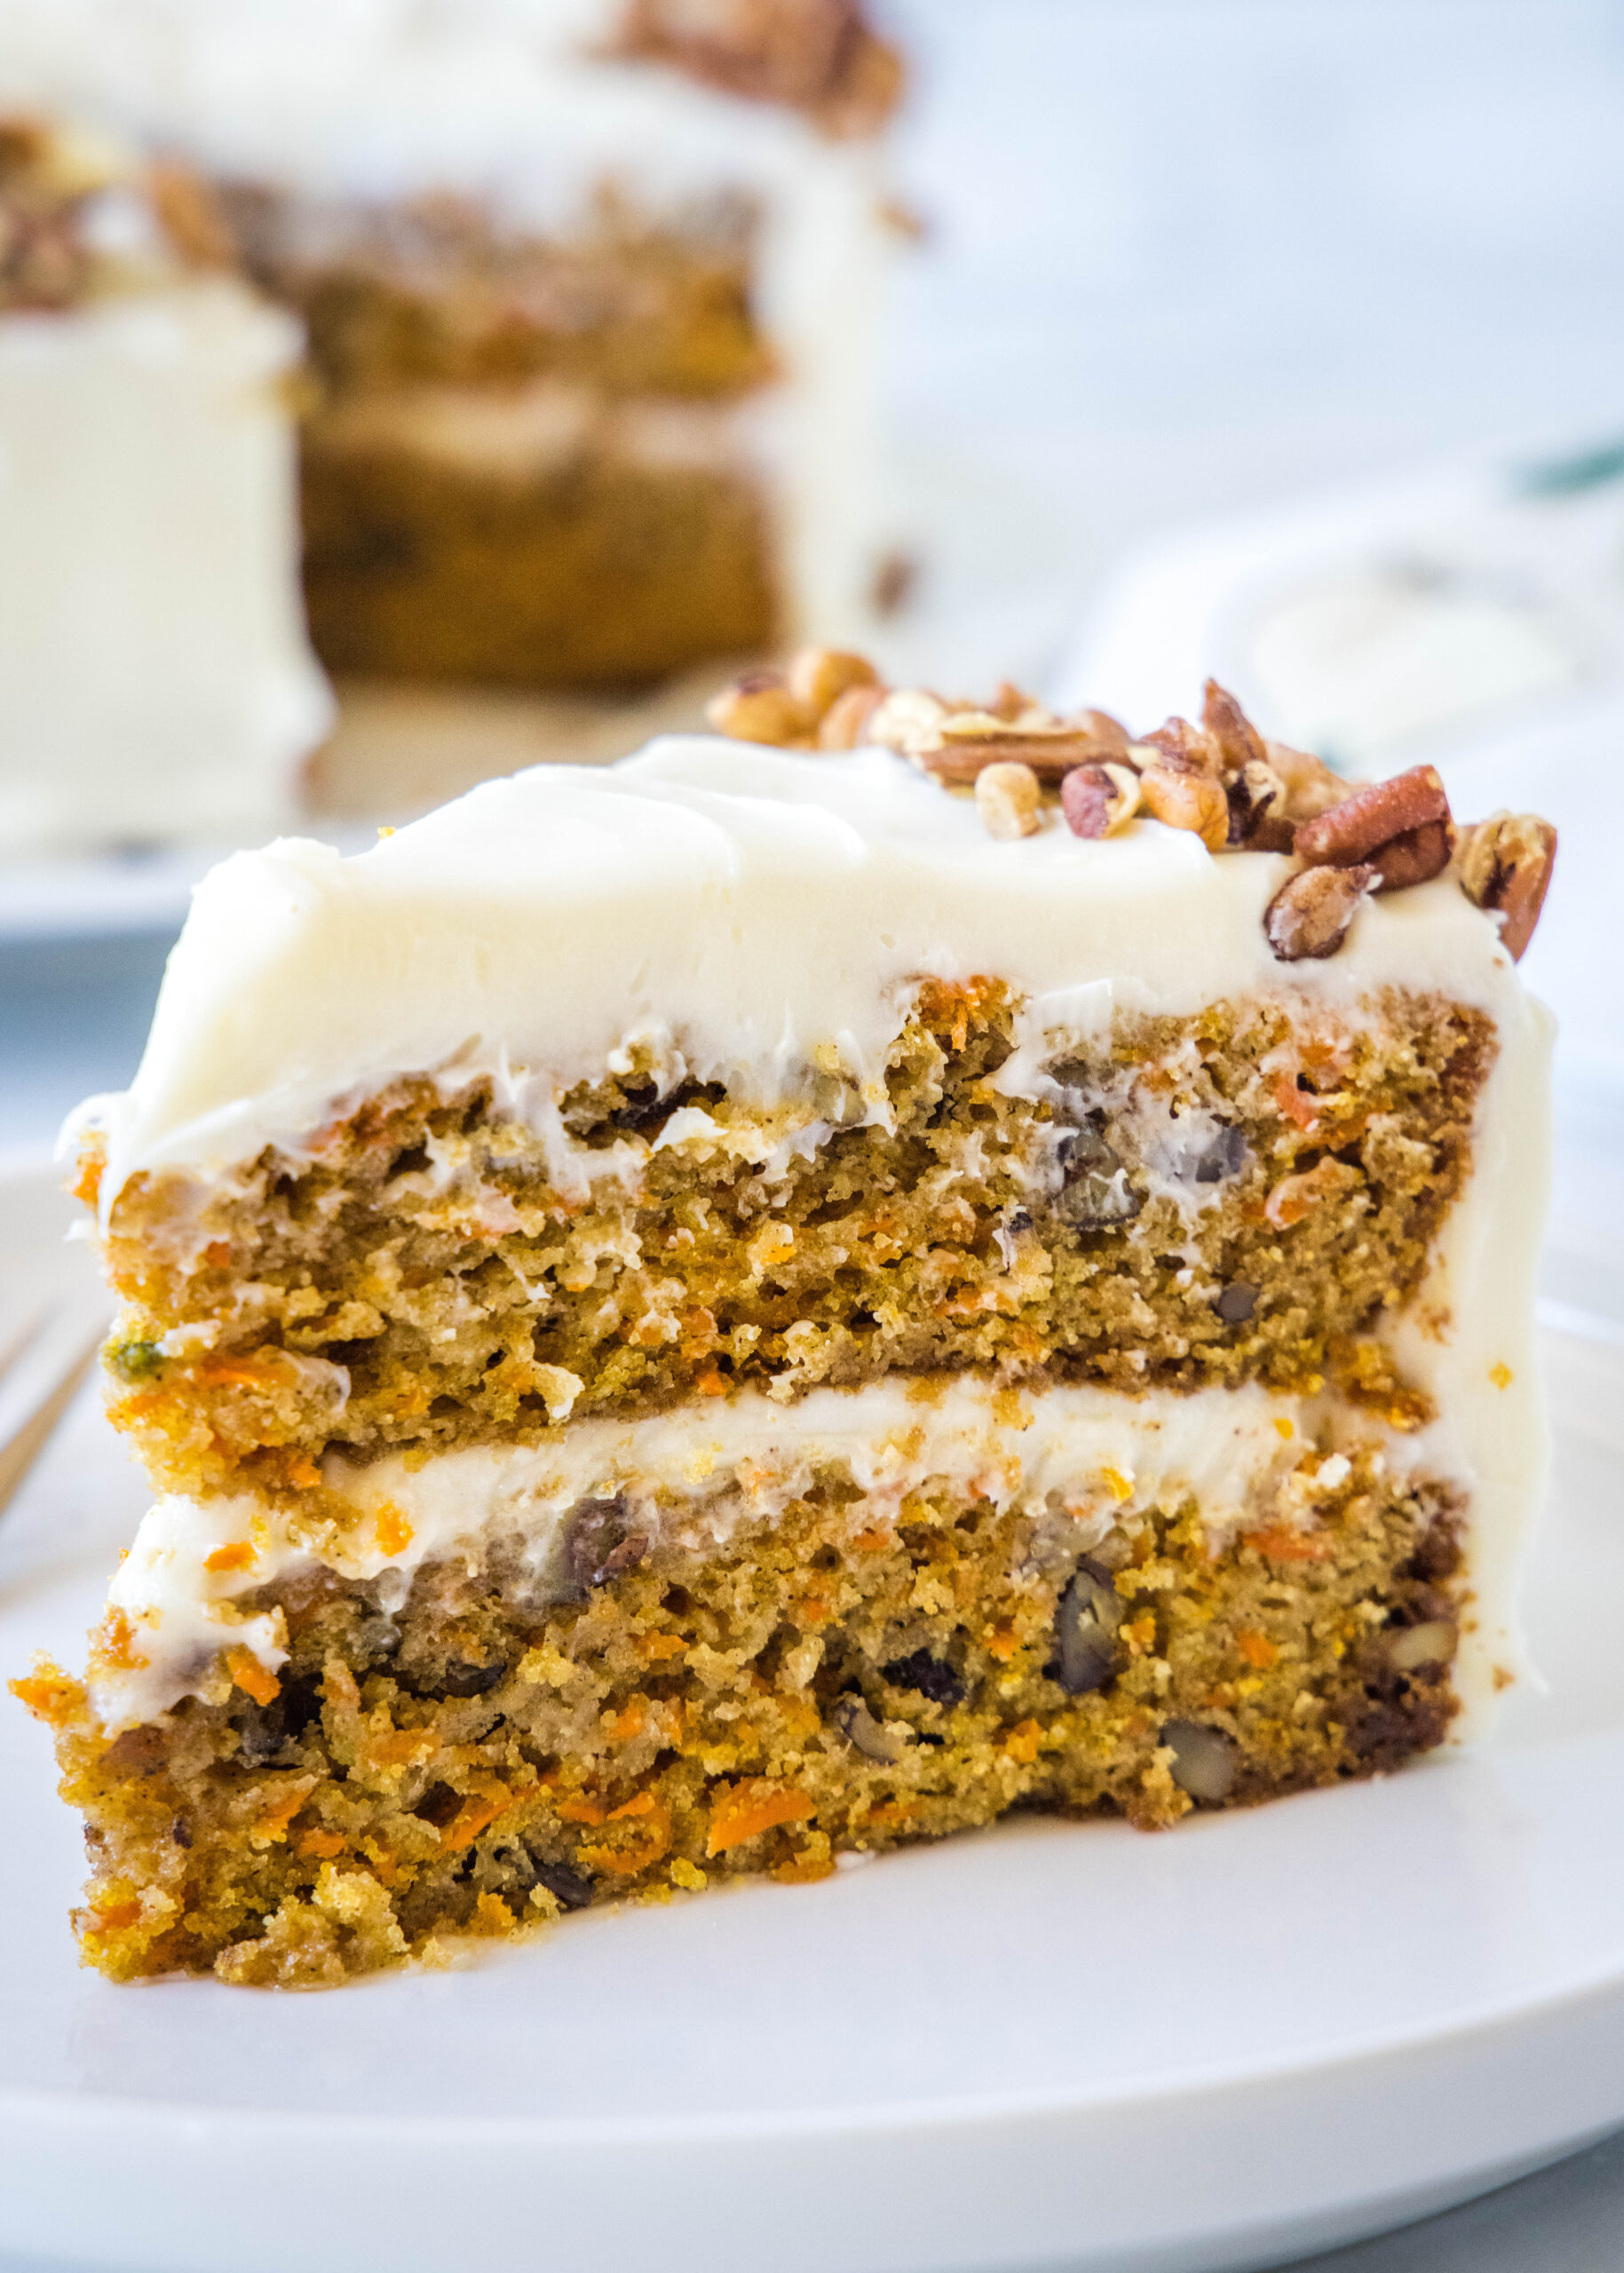 A slice of frosted carrot cake on a white plate.